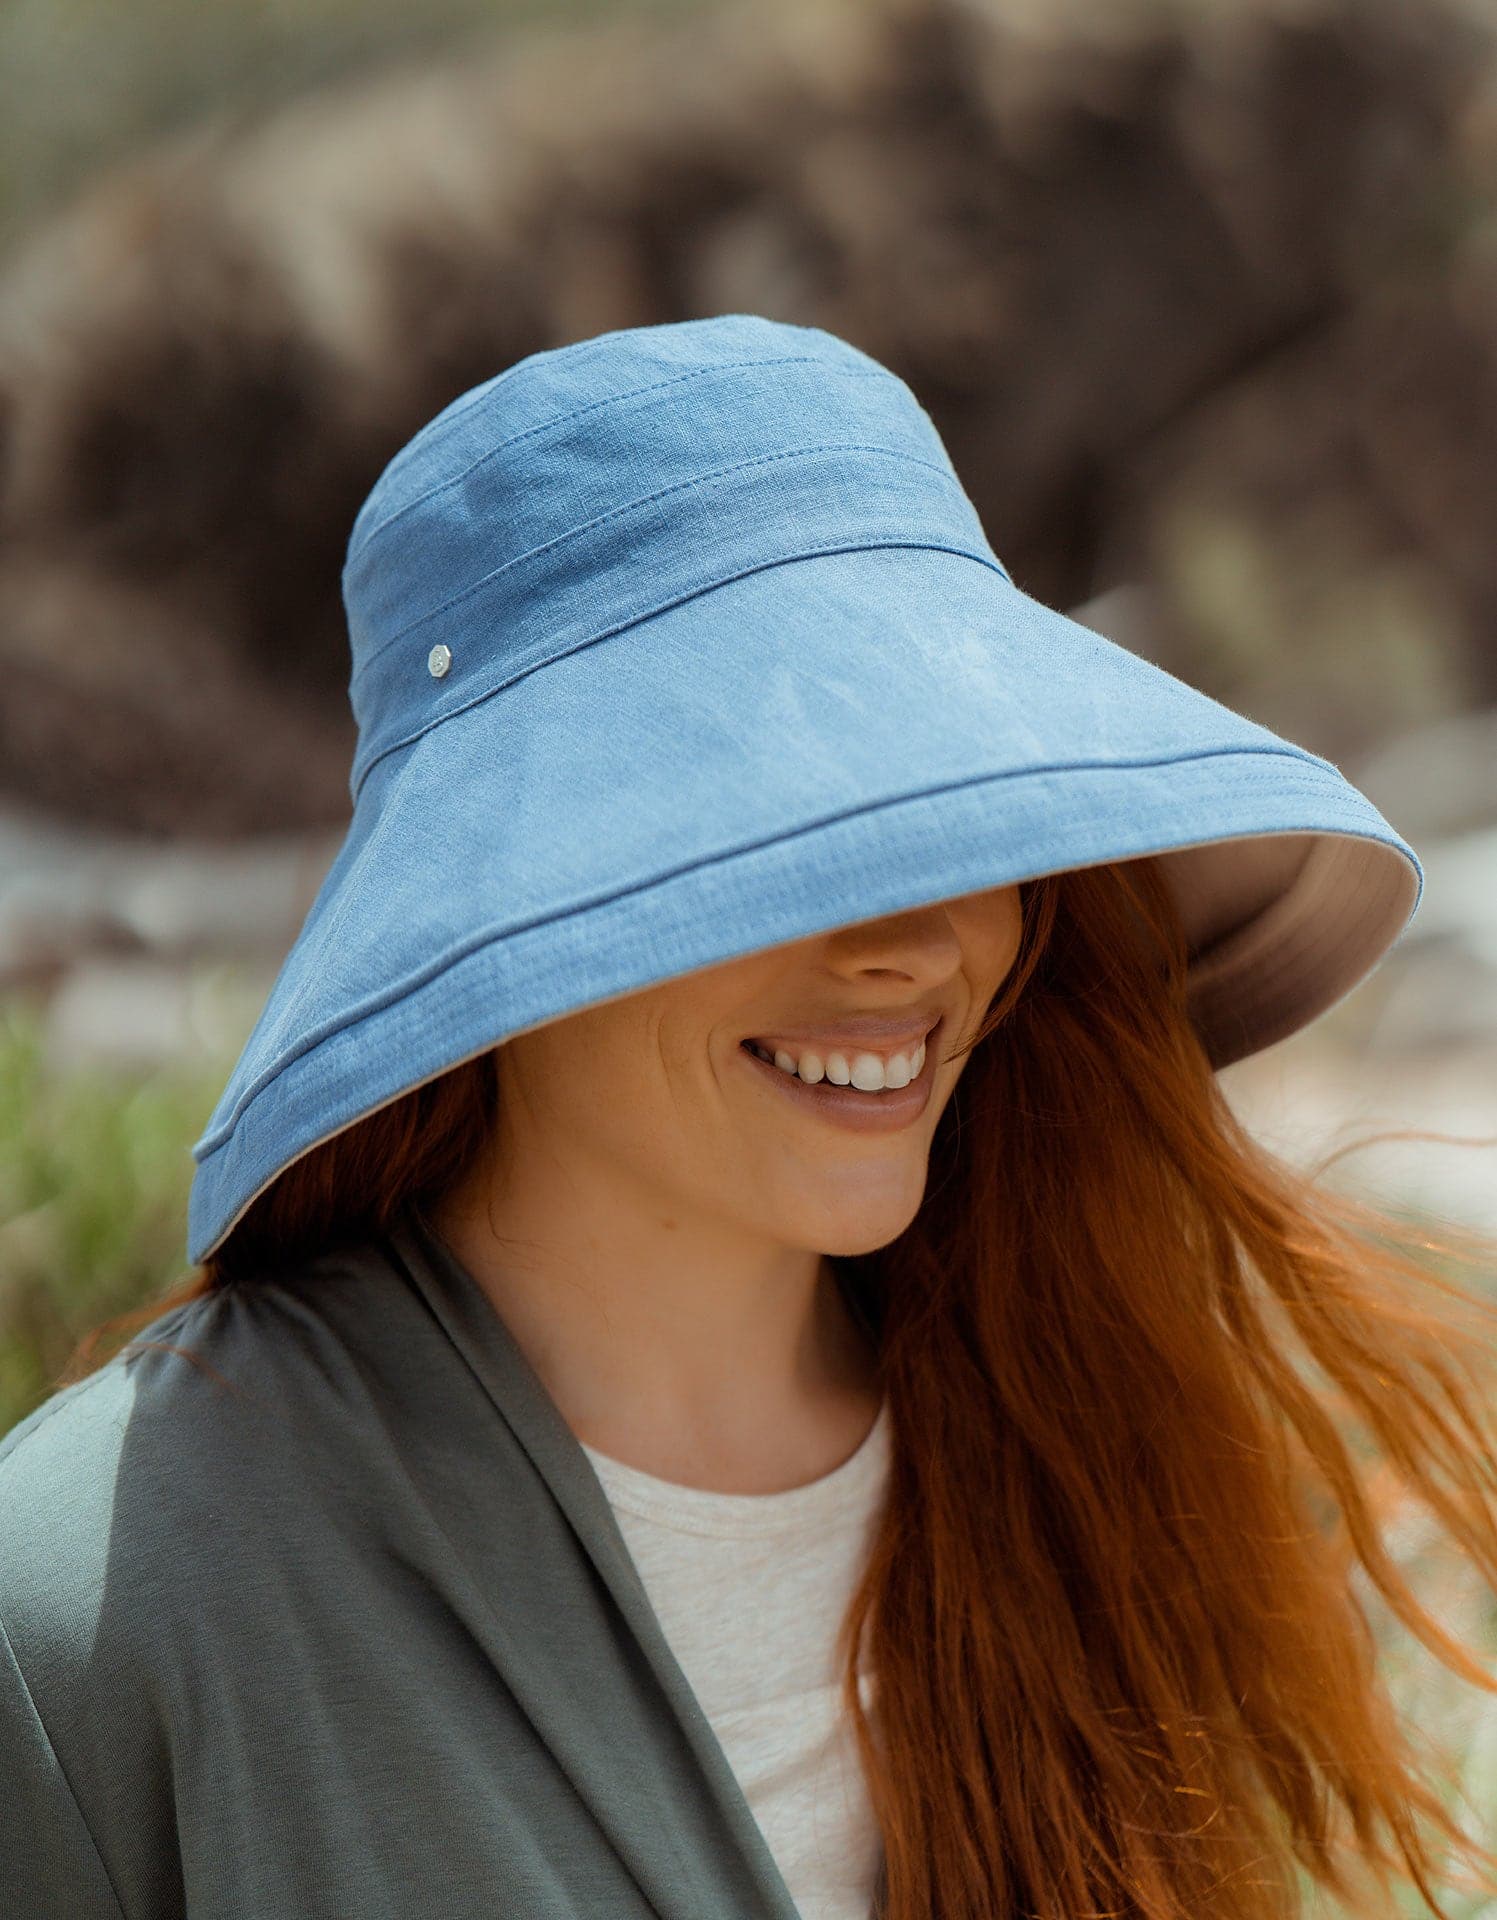 Complete the Gardening Outfit: Sun Protective Clothing for Women